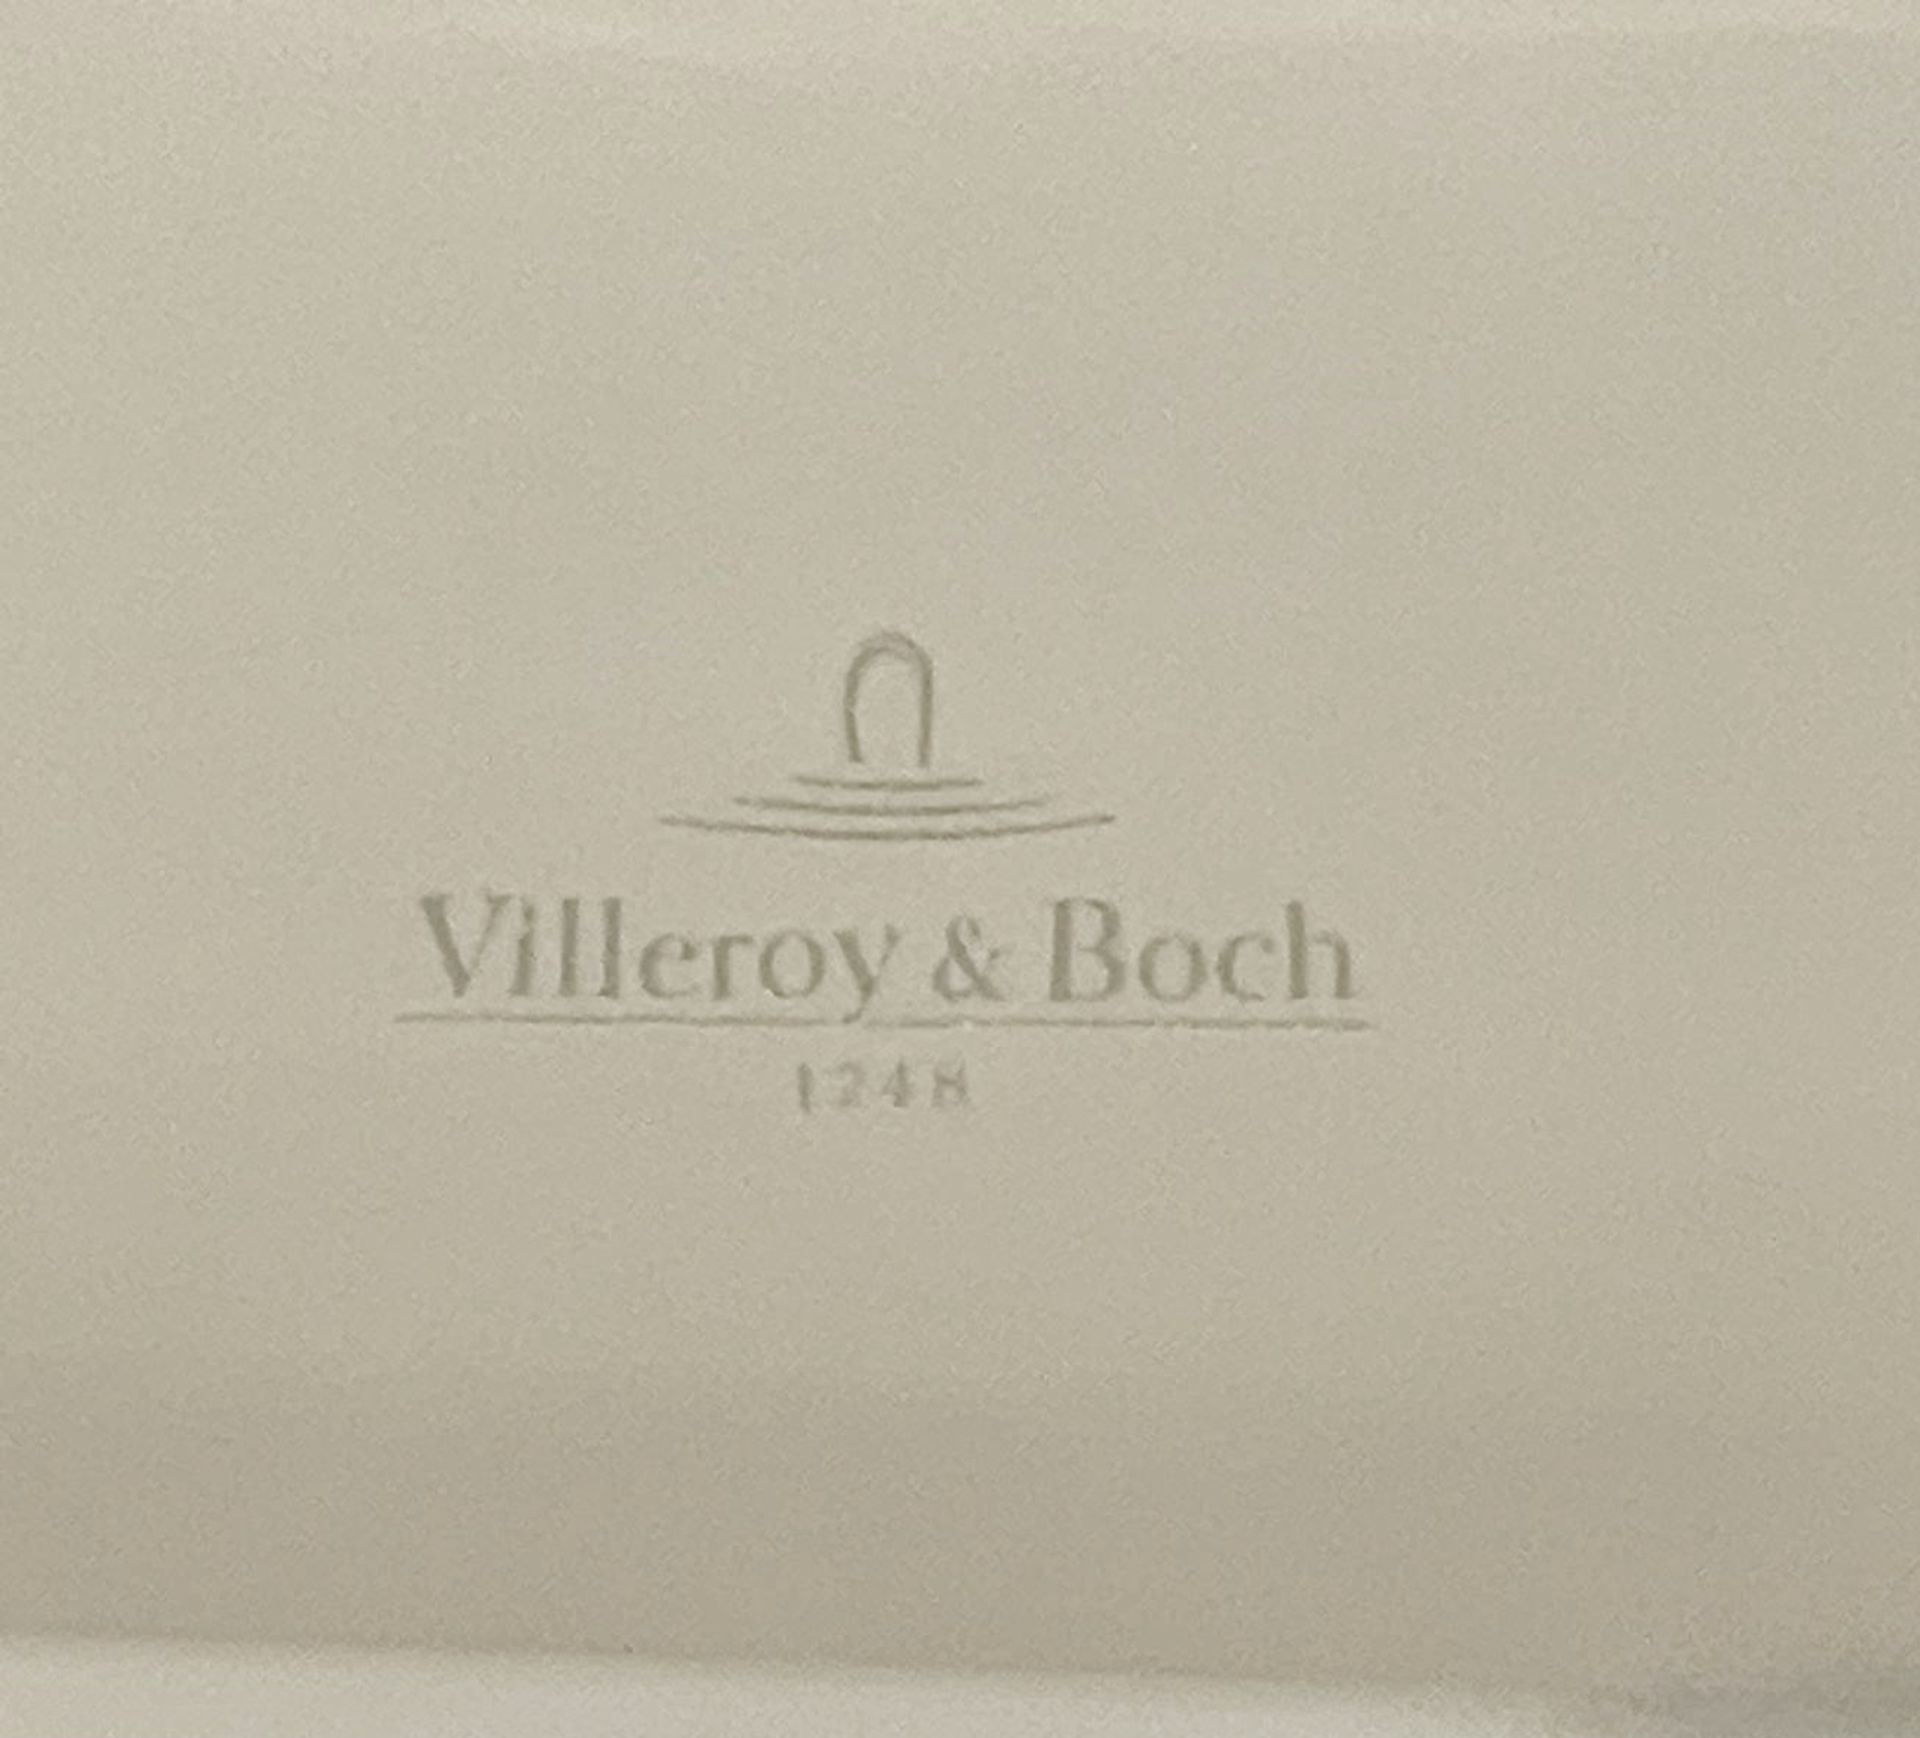 1 x VILLEROY & BOCH Wall Hung Toilet with Geberit Flush Plate - Ref: PAN273 BED3bth - CL896 - NO VAT - Image 4 of 9